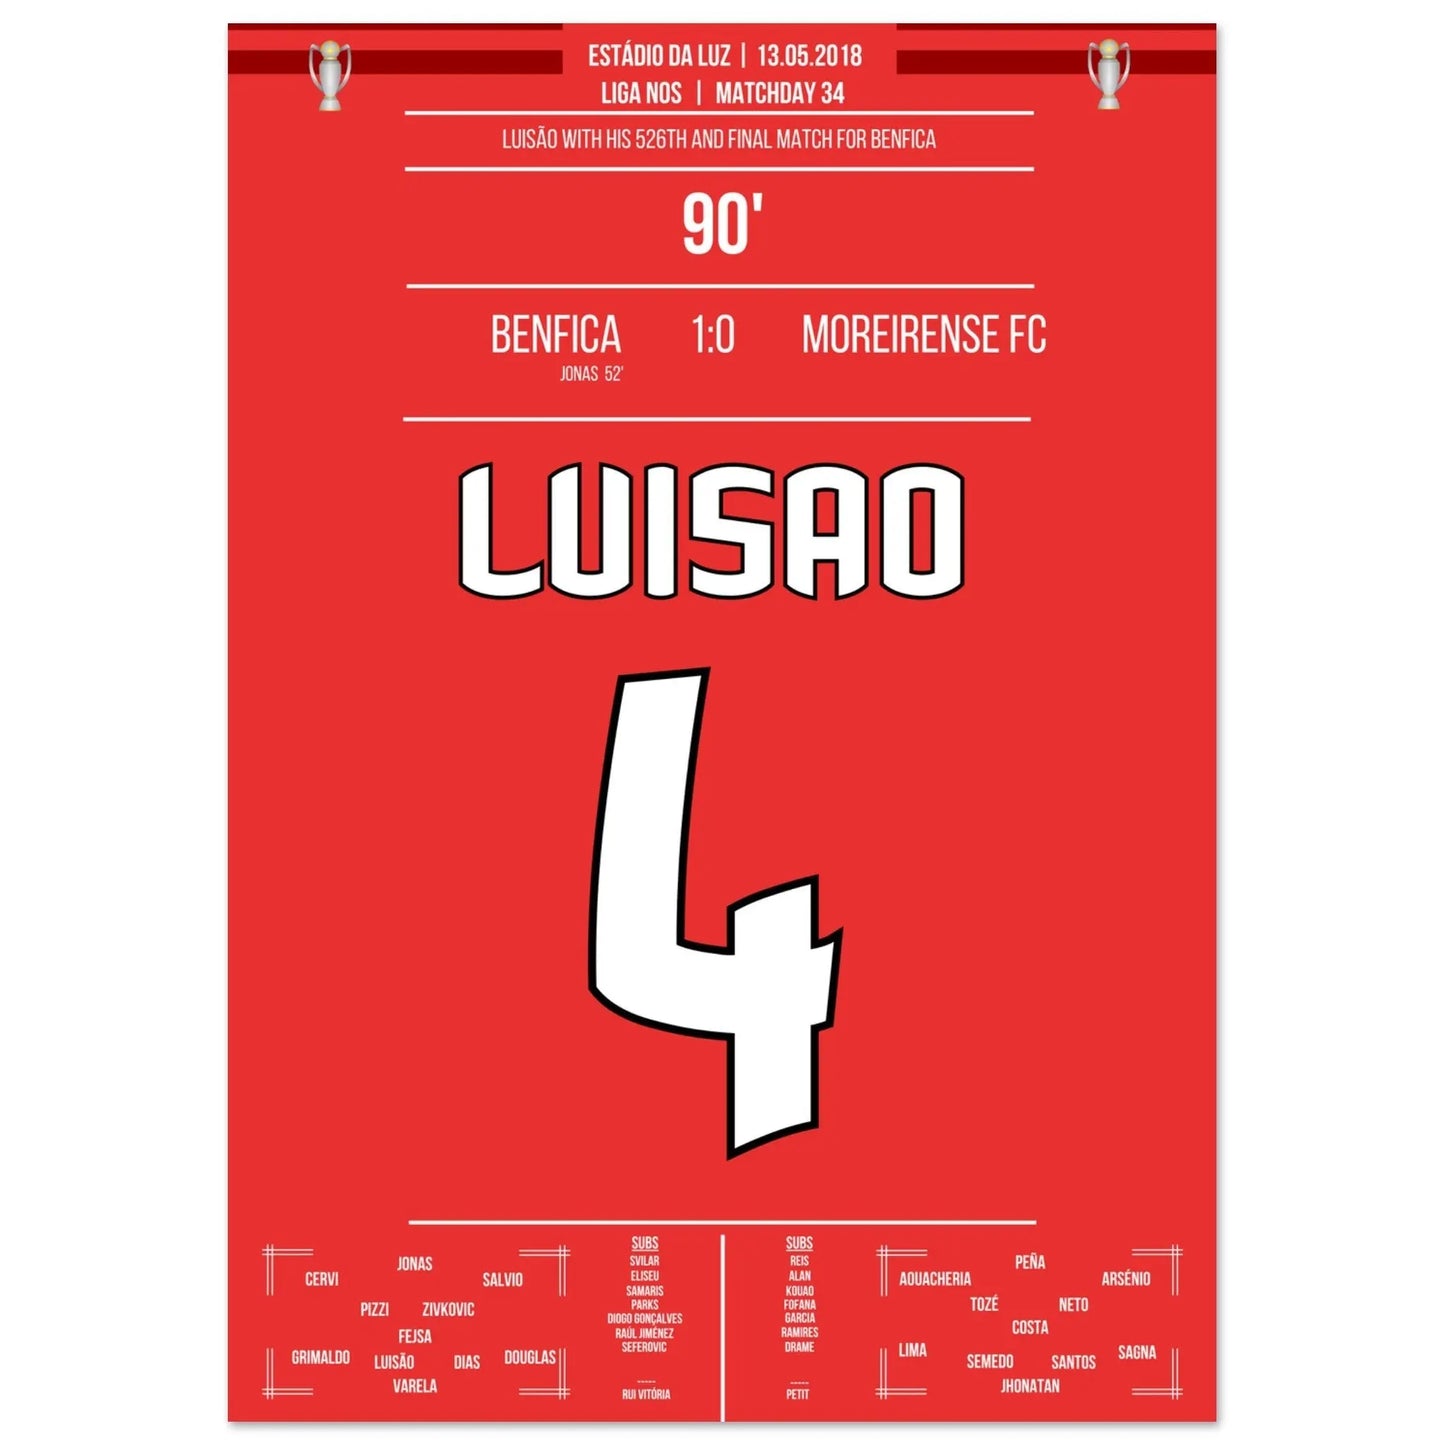 Luisao's last game for Benfica in 2018